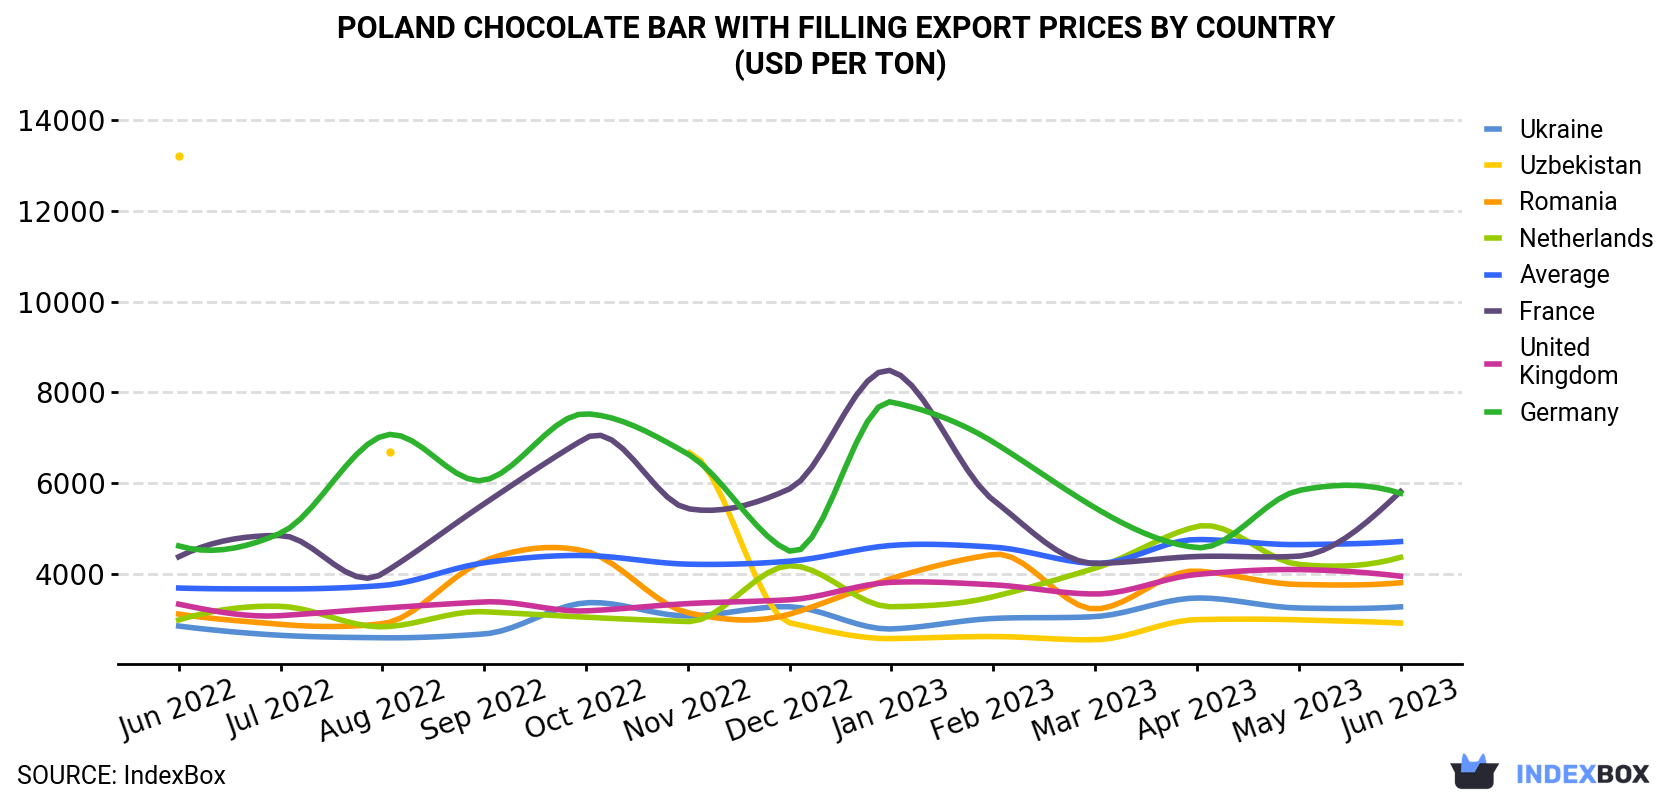 Poland Chocolate Bar With Filling Export Prices By Country (USD Per Ton)